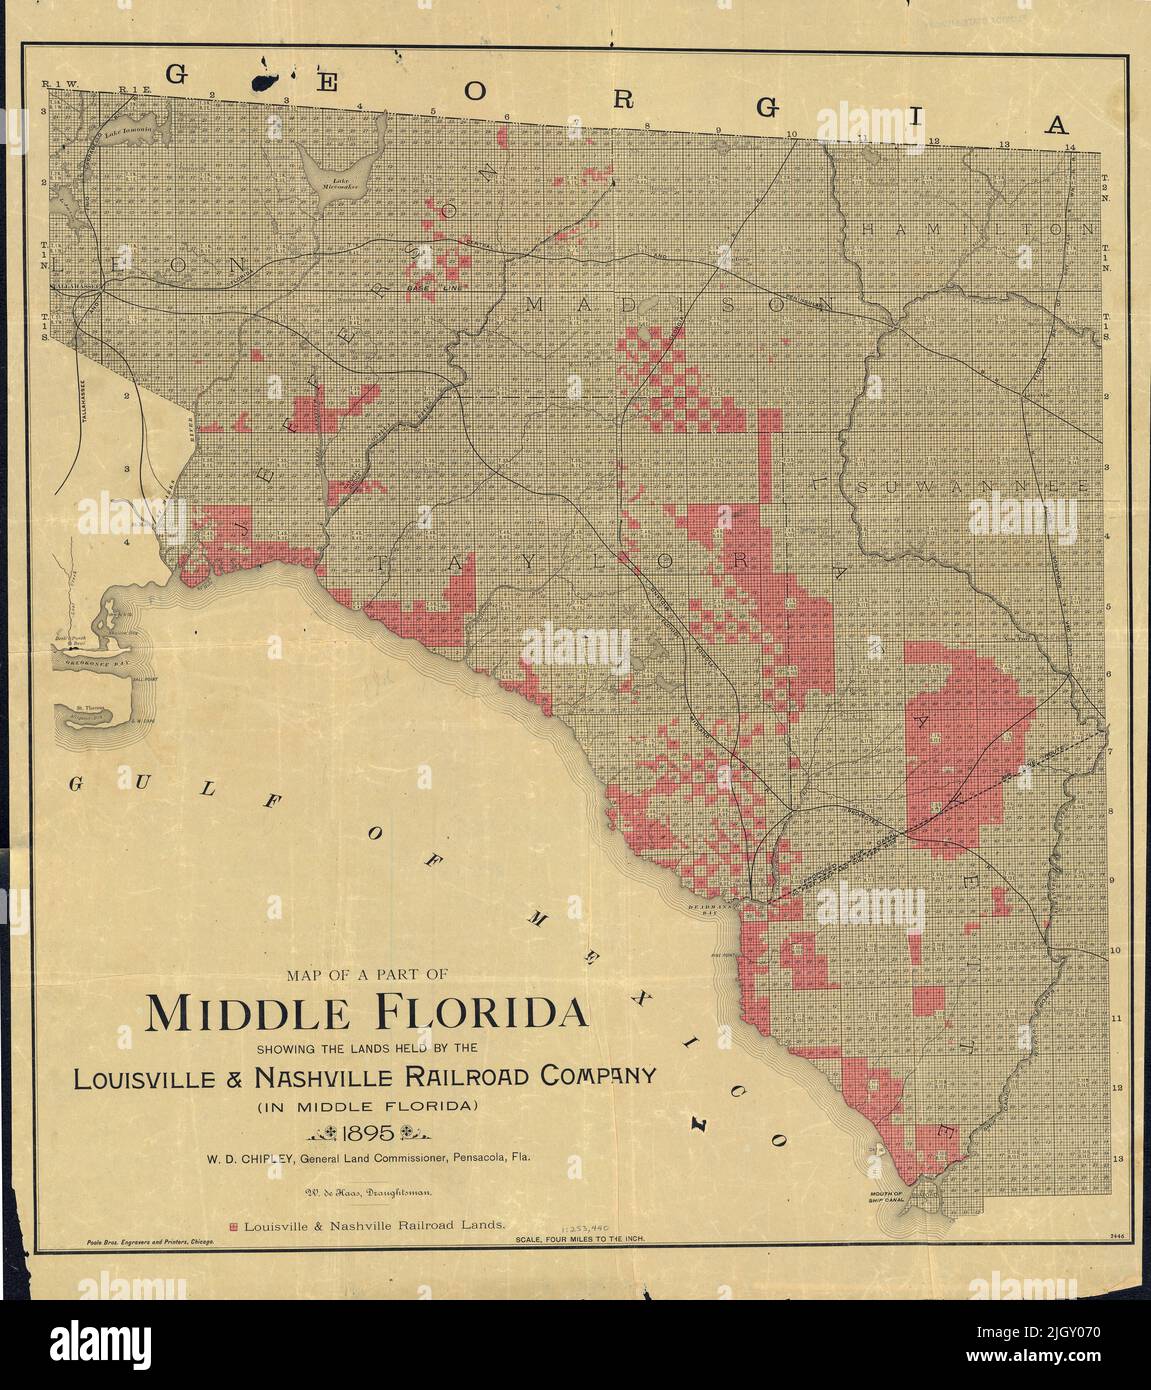 Map of a Part of Middle Florida, Showing the Lands Held by the Louisville & Nashville Railroad Company, 1895 Stock Photo